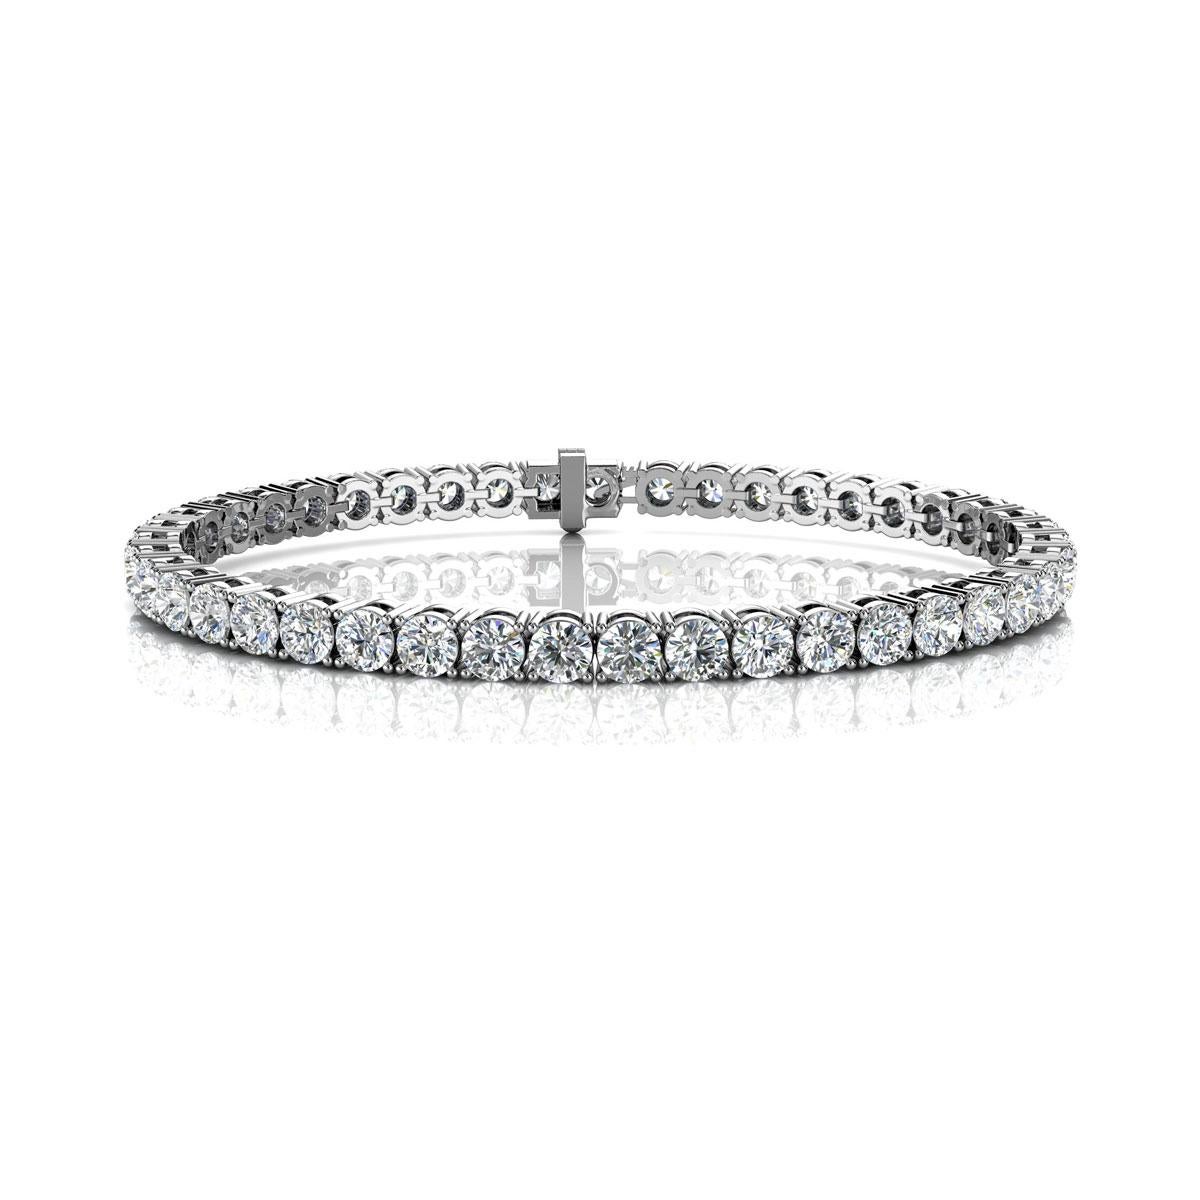 A timeless four prongs diamonds tennis bracelet. Experience the Difference!

Product details: 

Center Gemstone Type: NATURAL DIAMOND
Center Gemstone Color: WHITE
Center Gemstone Shape: ROUND
Center Diamond Carat Weight: 8
Metal: 18K White